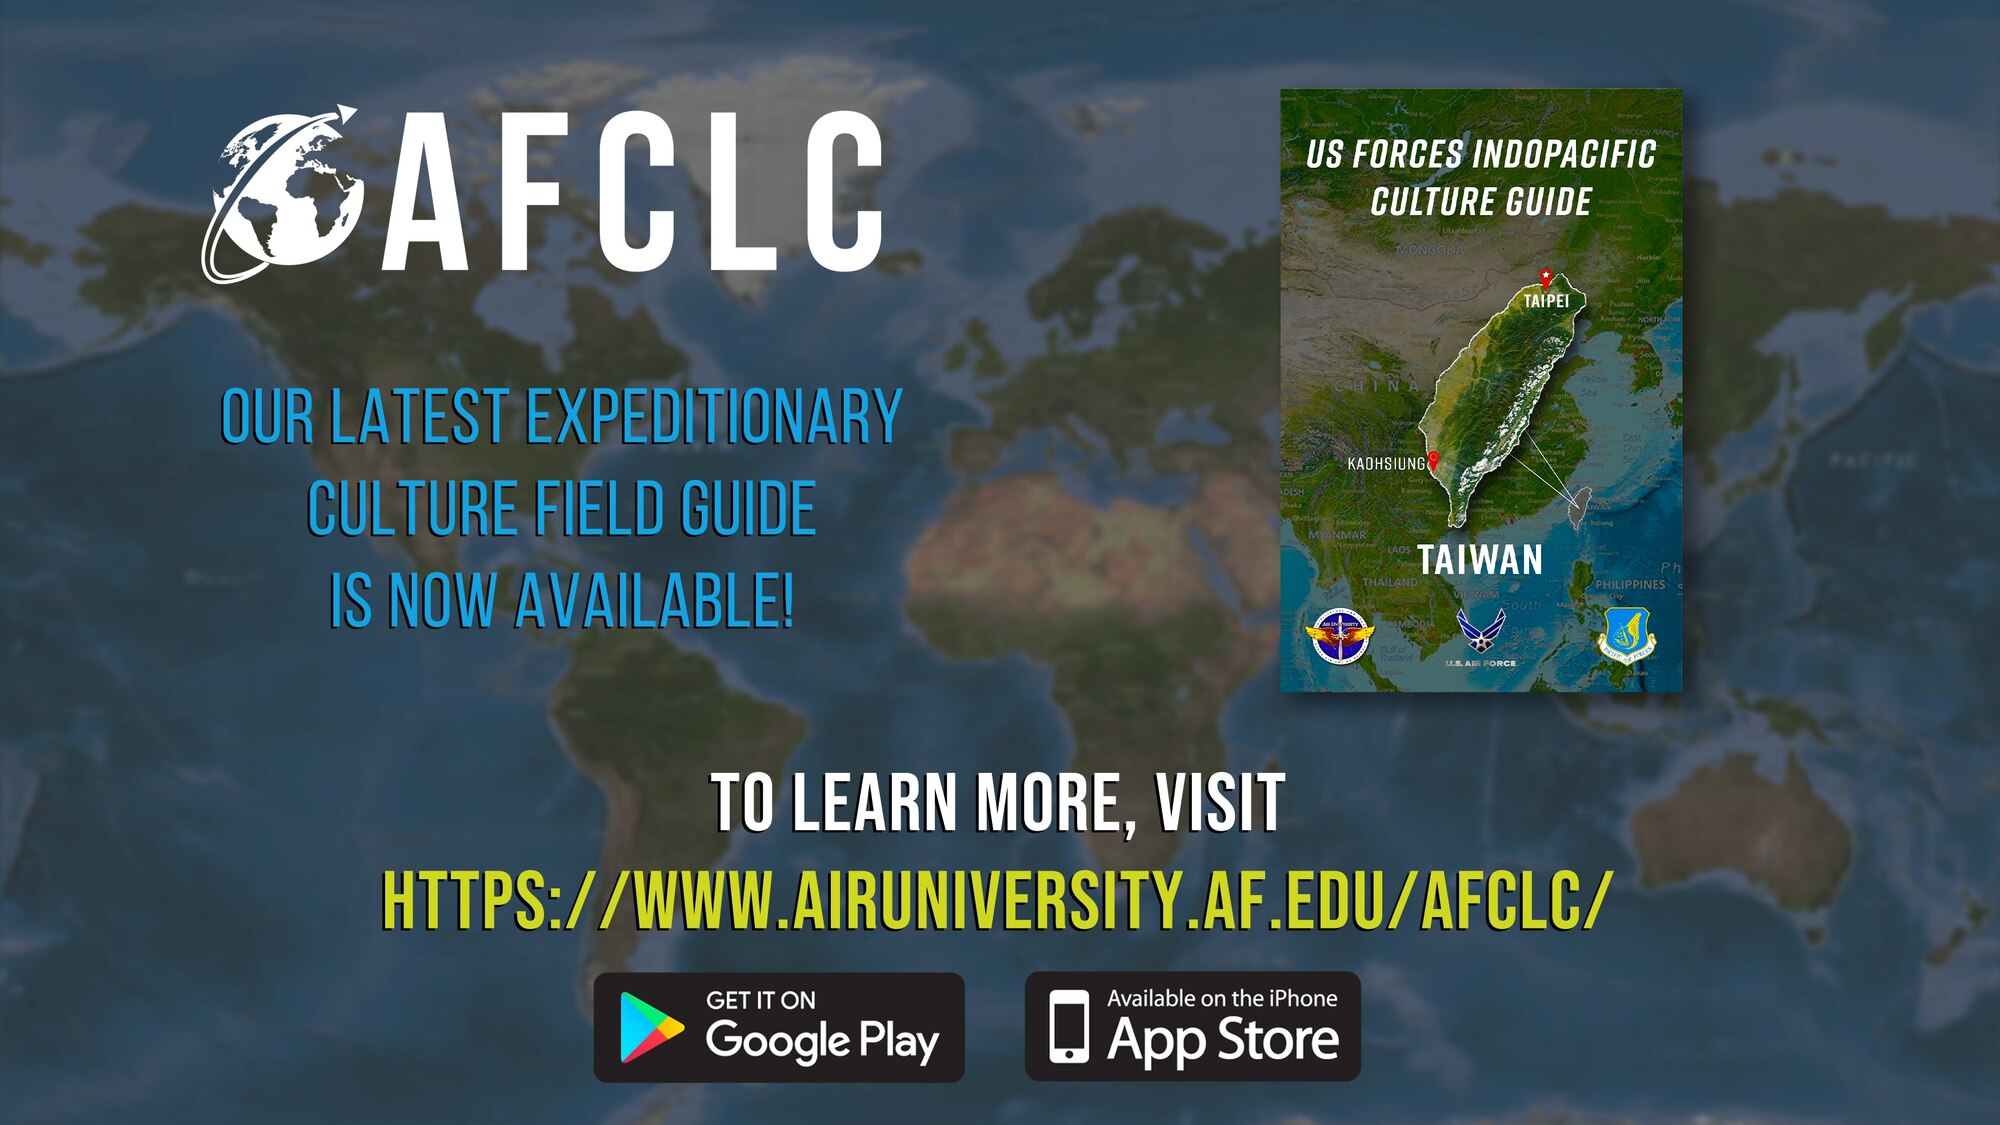 The Air Force Culture and Language Center at Air University continues to expand its Expeditionary Culture Field Guides inventory. This past month, Taiwan has been added to the center’s growing collection of field guides.